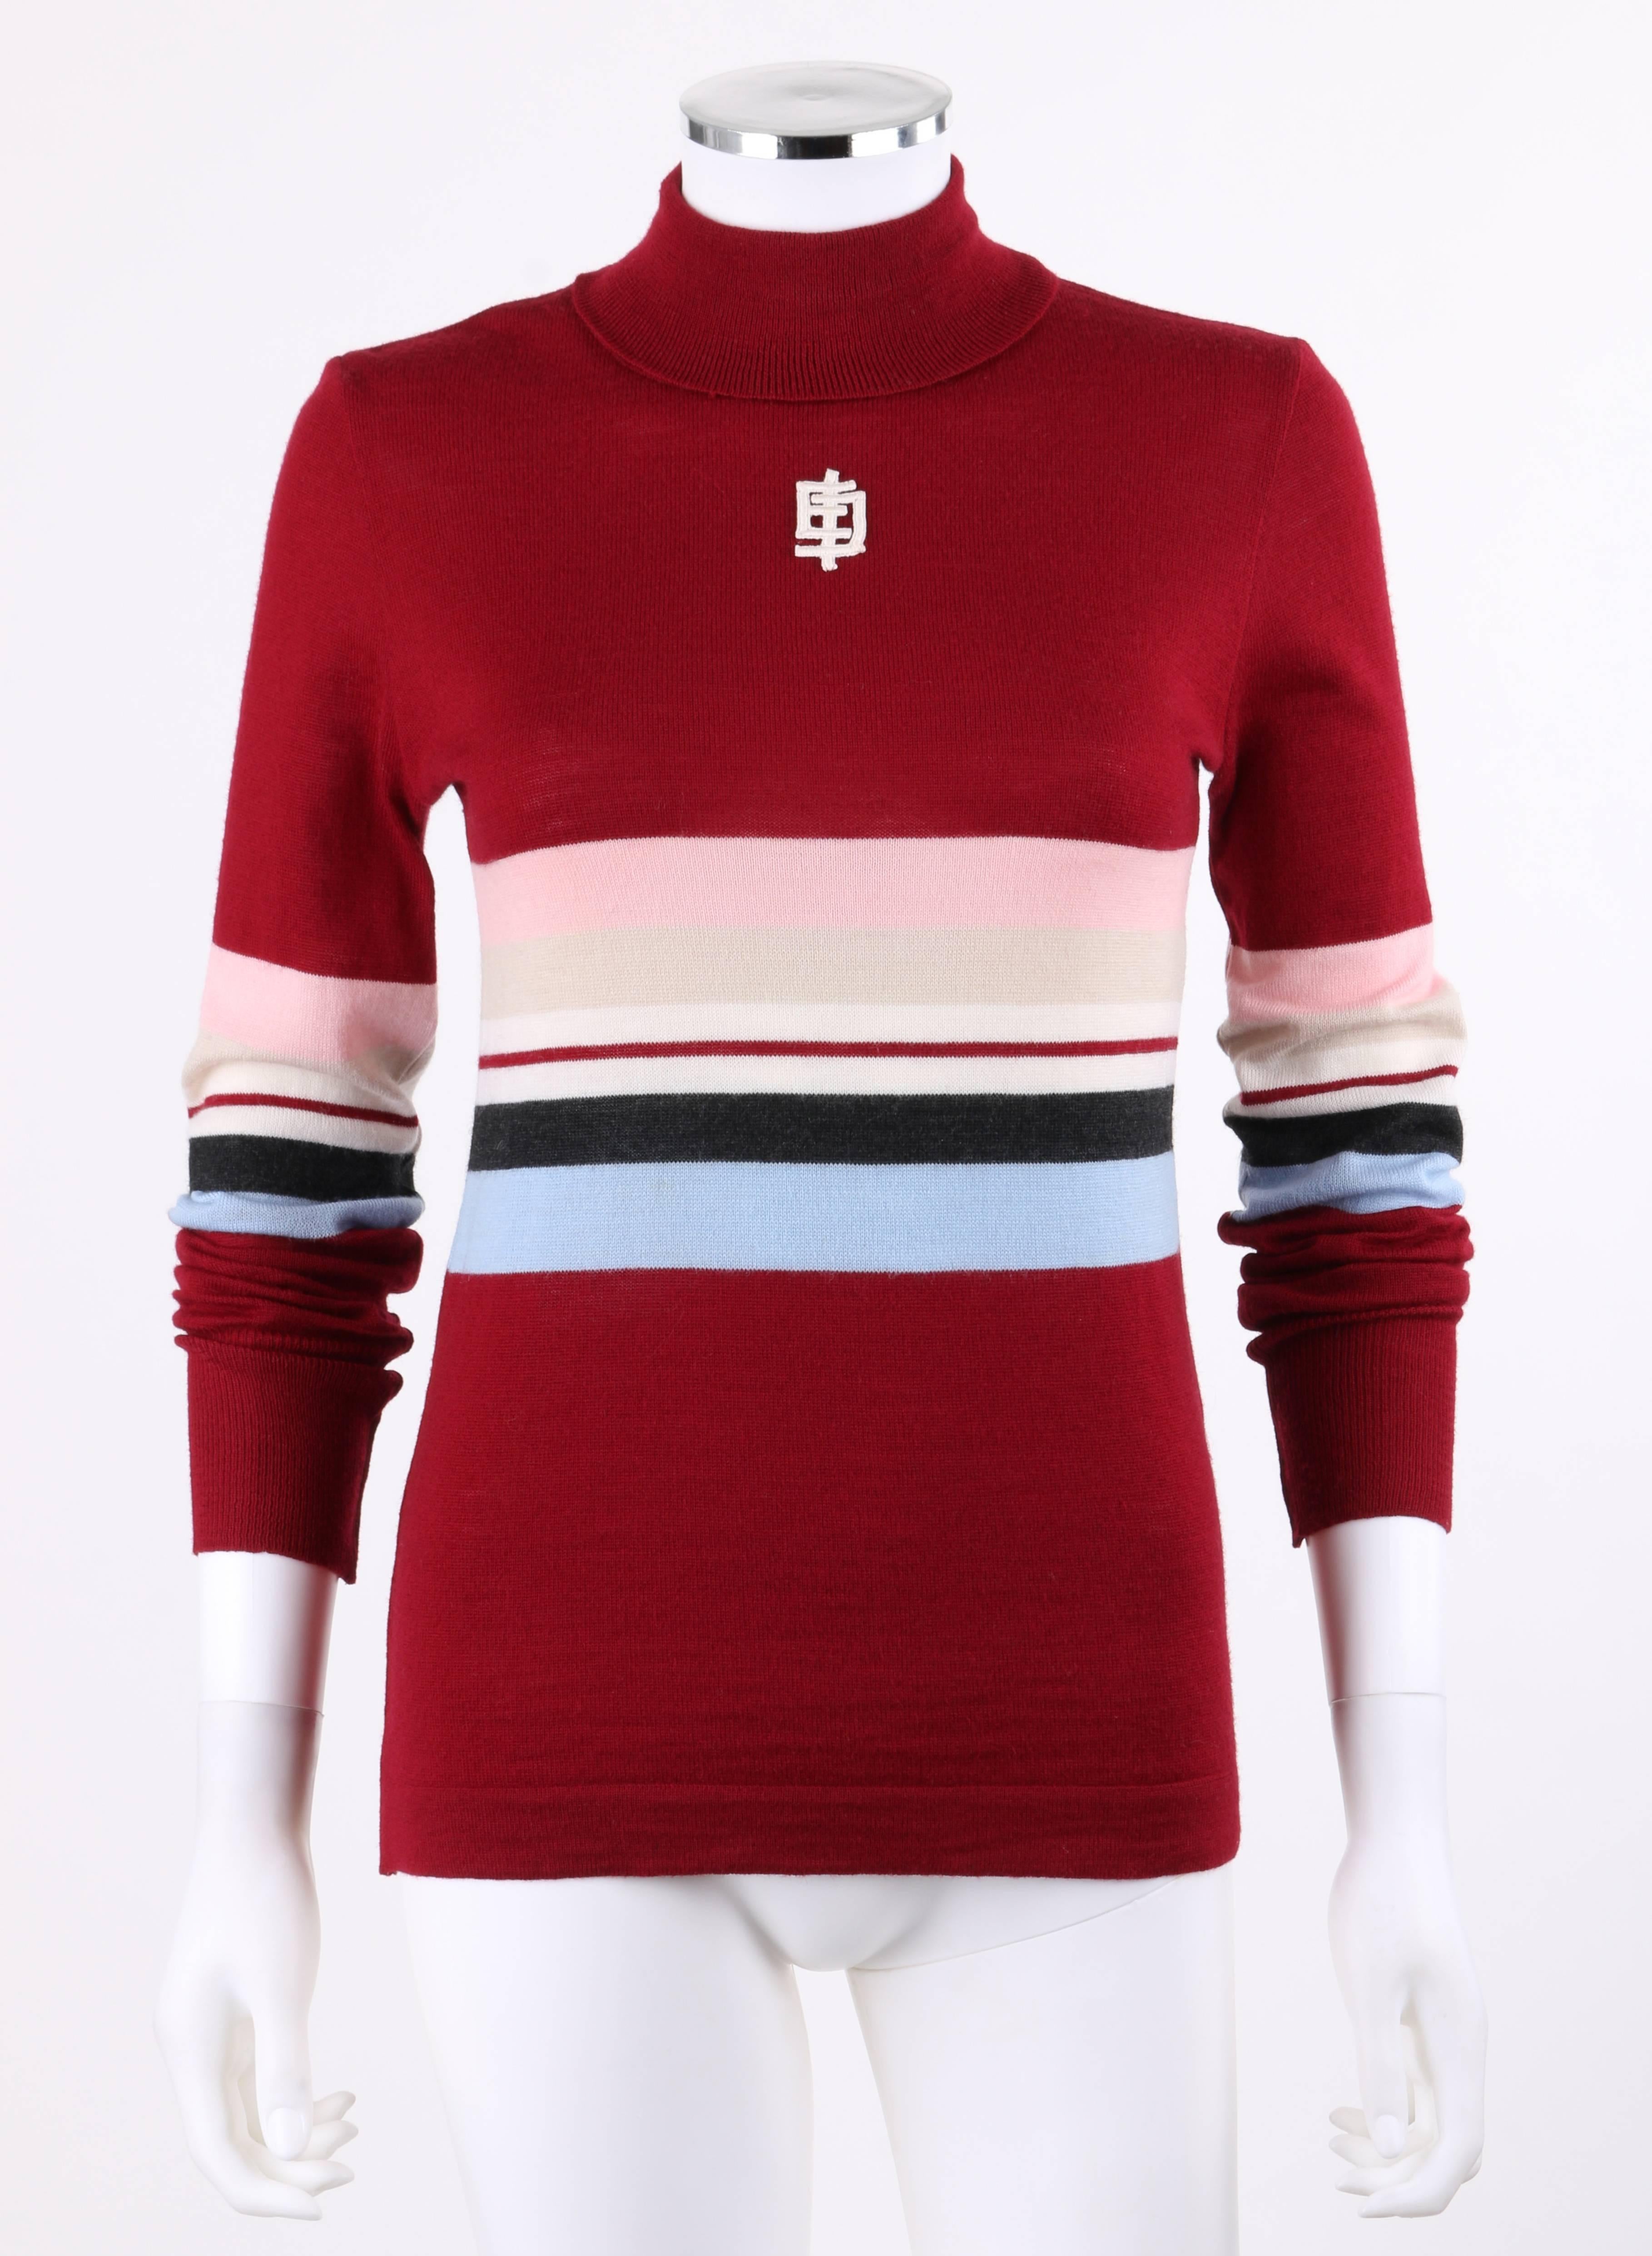 Emilio Pucci Burgundy Wool Striped Knit Turtleneck Sweater Top circa 1970s

Brand / Manufacturer: Emilio Pucci 
Designer: Emilio Pucci
Circa: 1970's
Style: Turtleneck sweater
Color(s): Shades of pink, grey, white, blue, and black
Lined: No
Marked